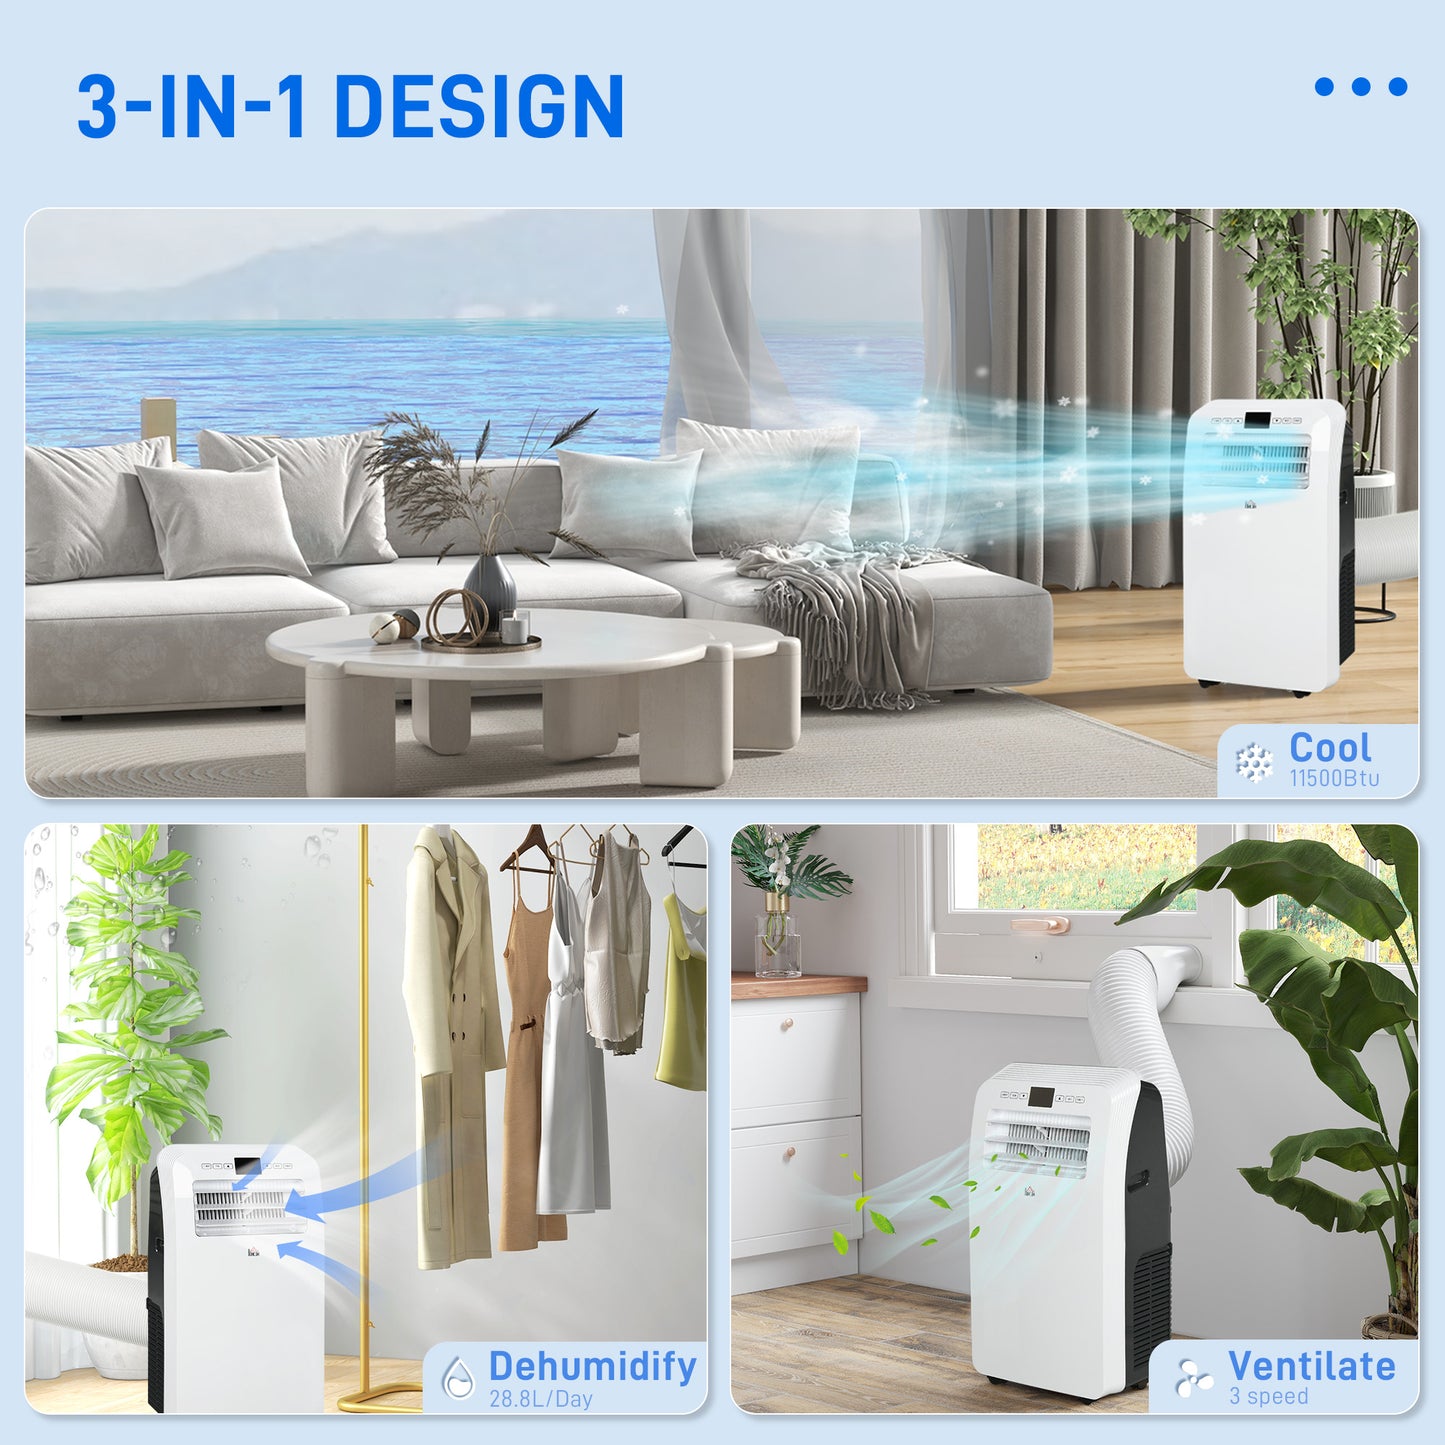 HOMCOM 12000 BTU Portable Air Conditioner, 3-in-1 Air Conditioning Unit, Dehumidifier, Cooling Fan with Remote Control, Digital Display, 3 Speeds, 24H Timer On/Off, Window Venting Kit, 28m²